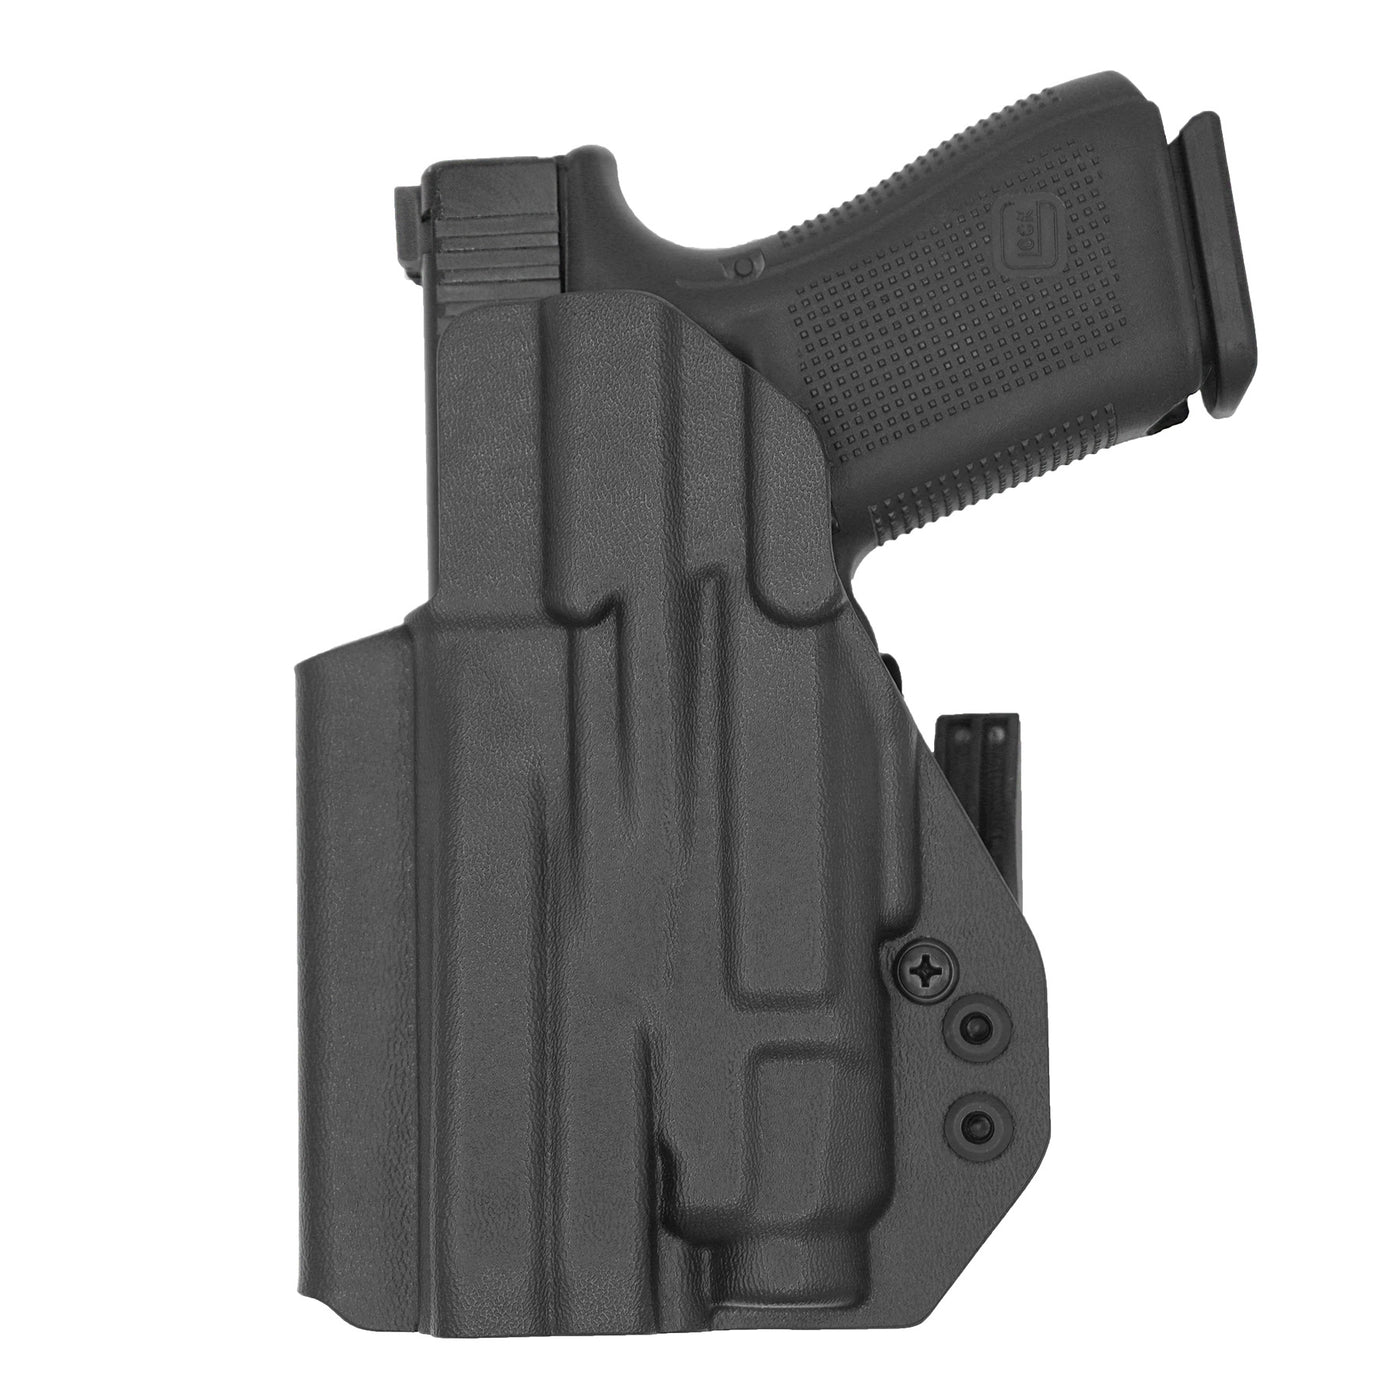 C&G Holsters Quickship IWB ALPHA UPGRADE Tactical Glock 19/23 Streamlight TLR7 in holstered position back view